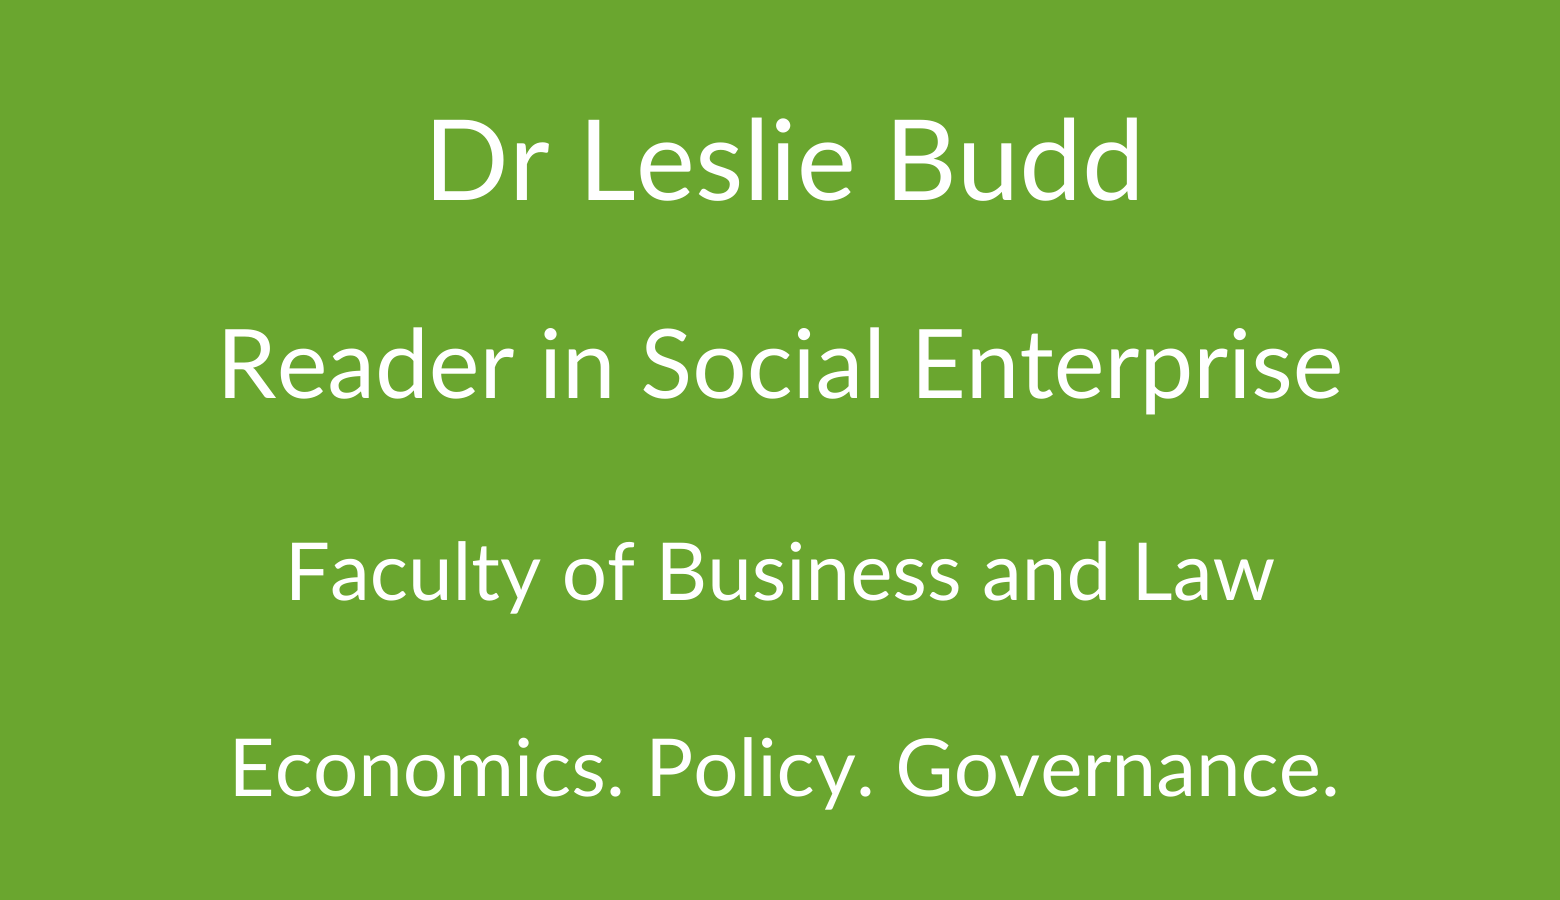 Dr Leslie Budd. Reader in Social Enterprise. Faculty of Business and Law. Economics. Policy. Governance.